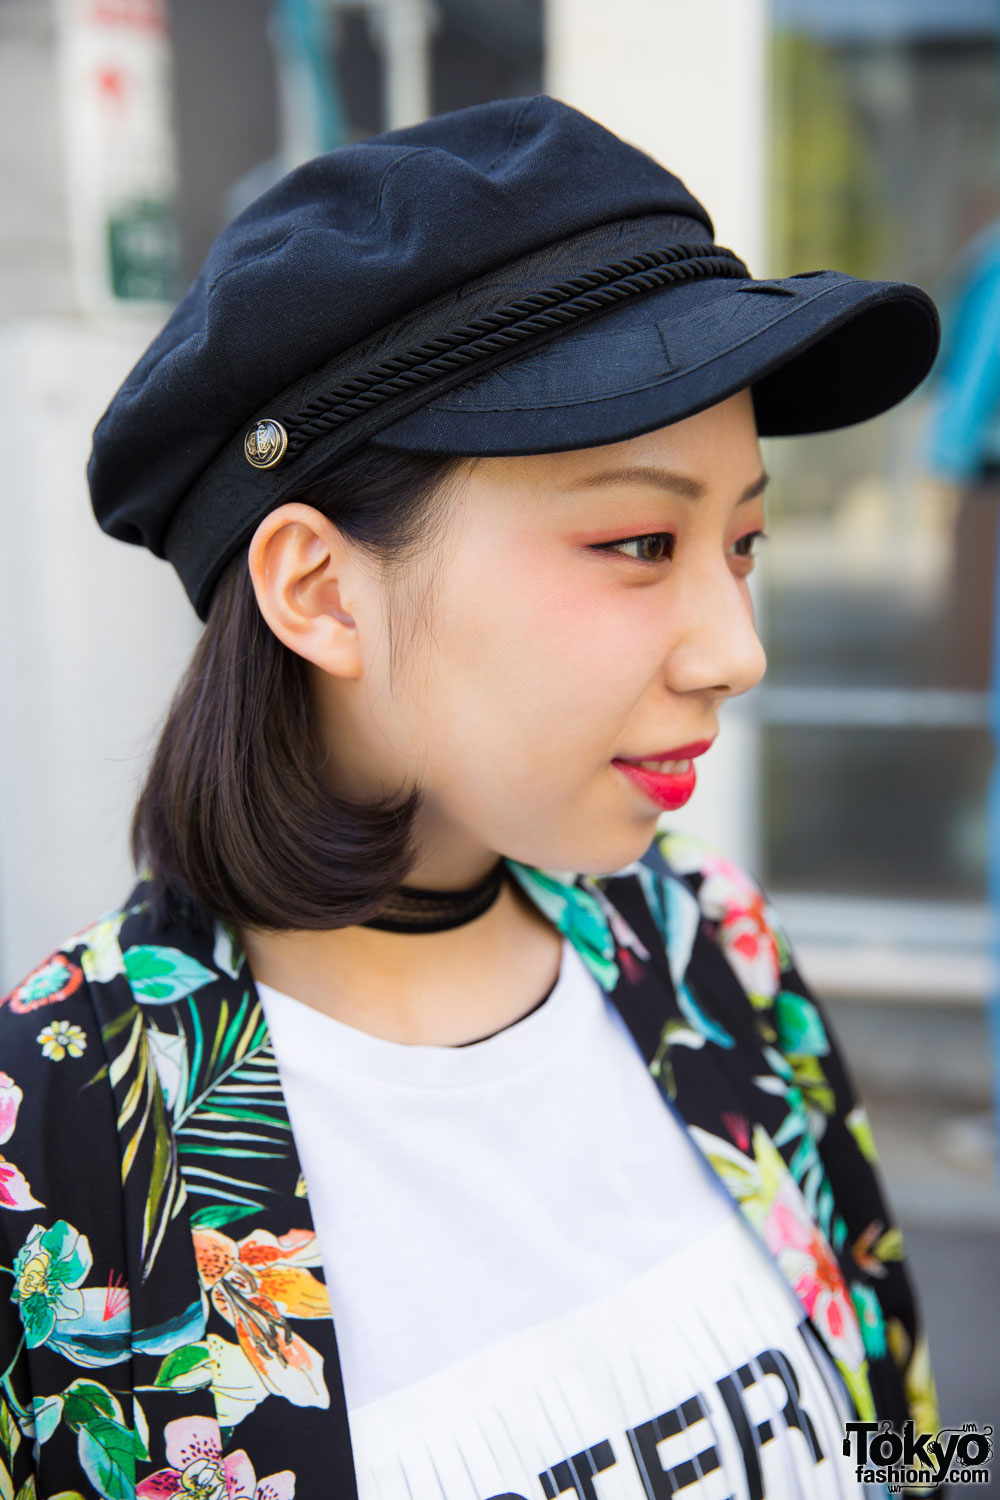 Harajuku Girls in Floral & Lace Fashion by Tokyo Bopper, Dr. Martens ...